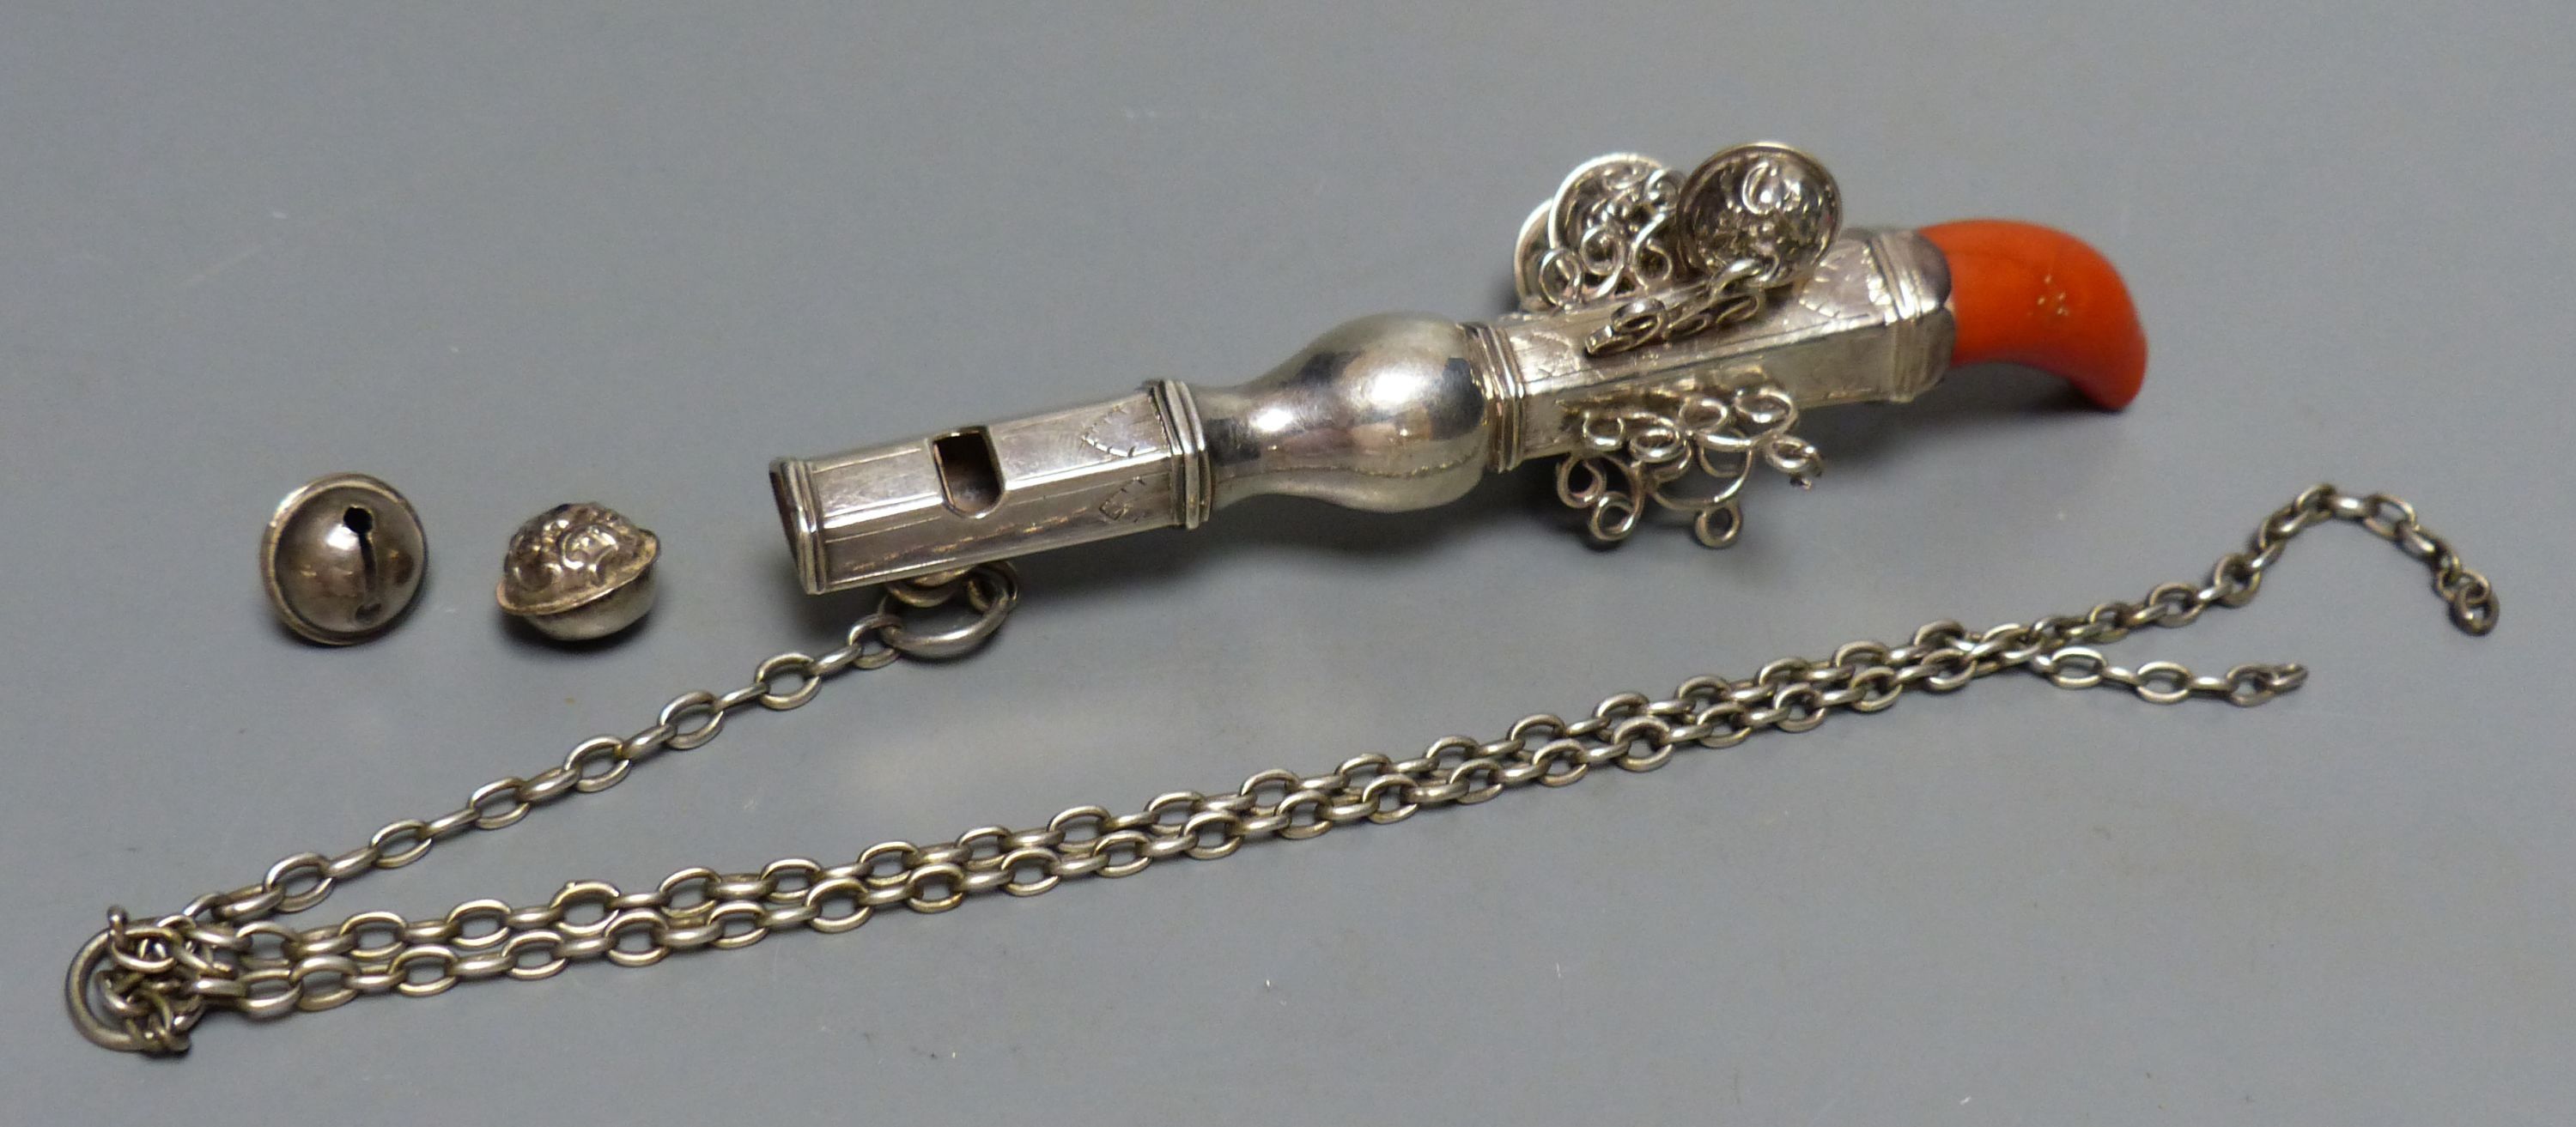 A 19th century? white metal child's rattle with coral teether and seven bells (2 detached) unmarked, 13cm,